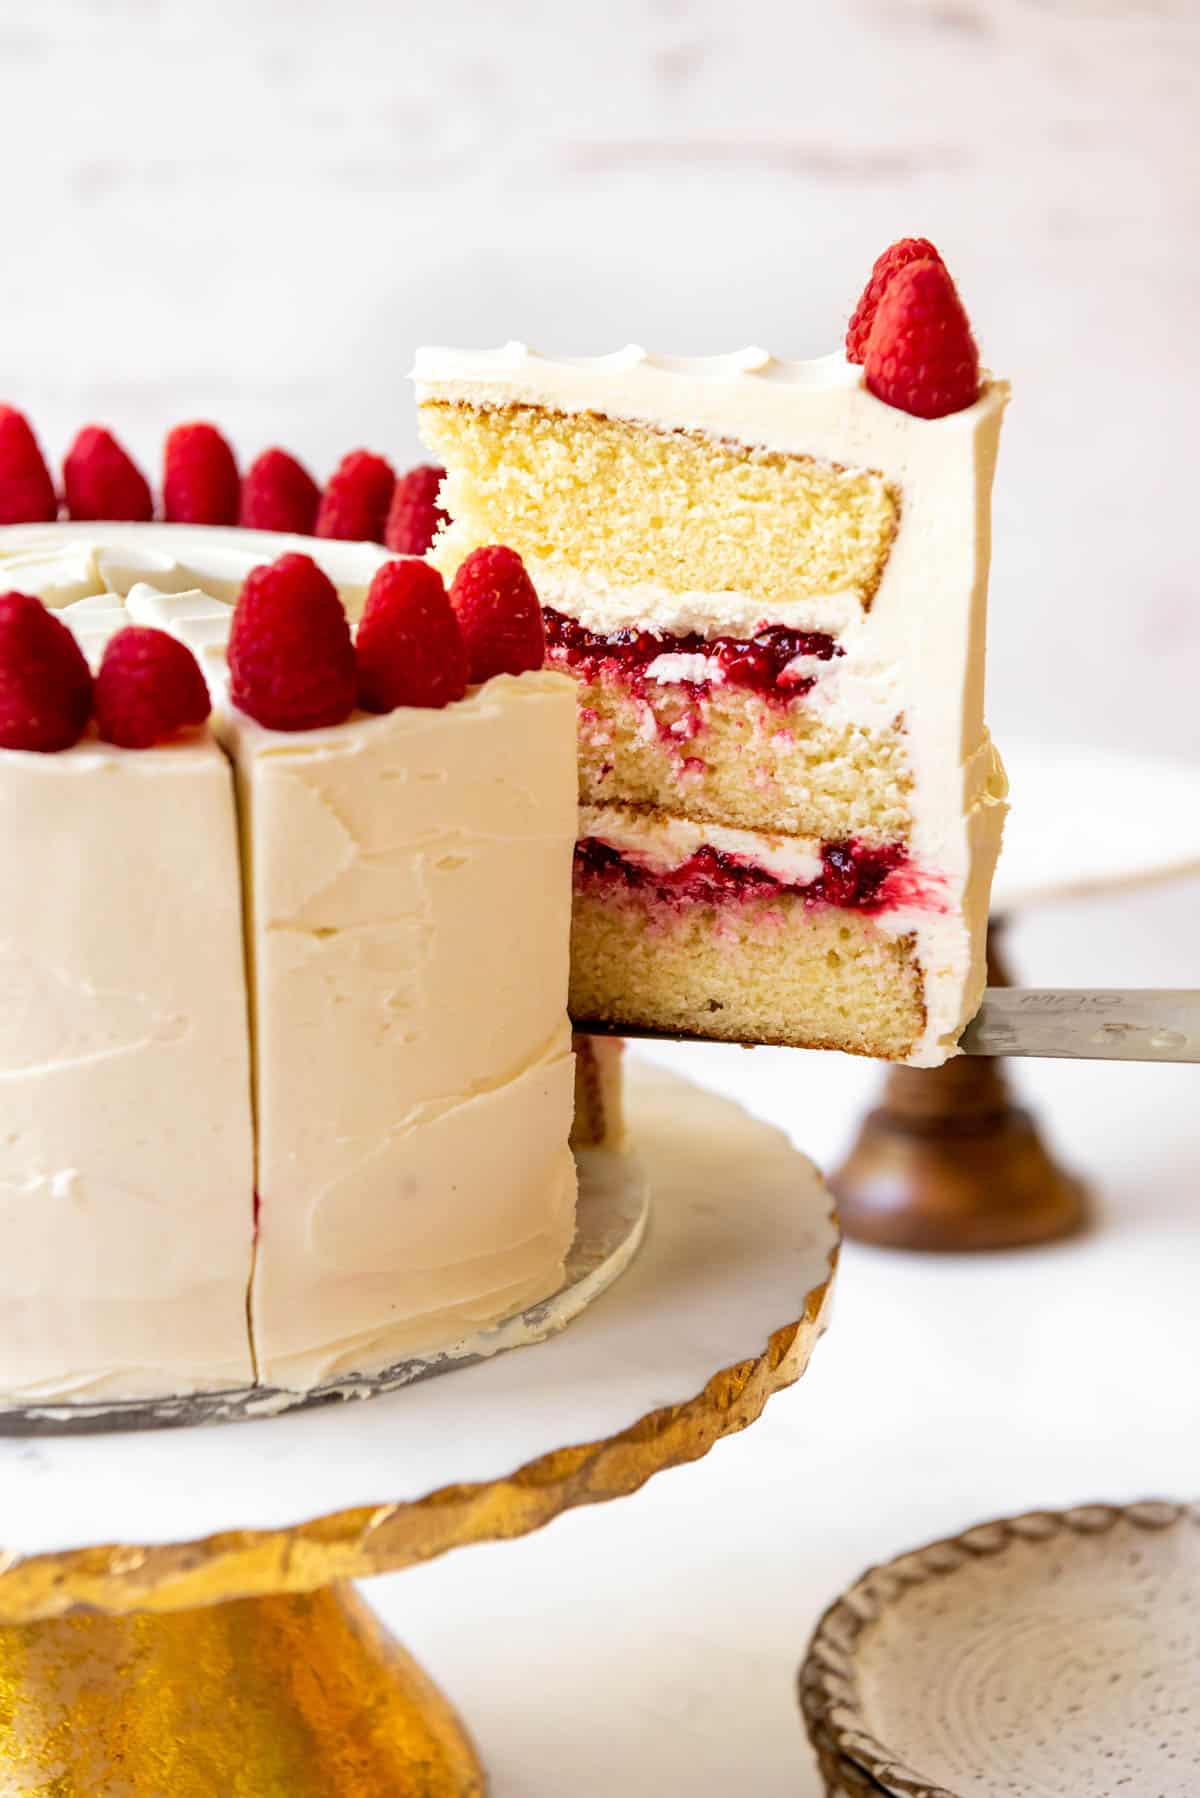 A slice of white chocolate raspberry cake being lifted out of a whole cake.